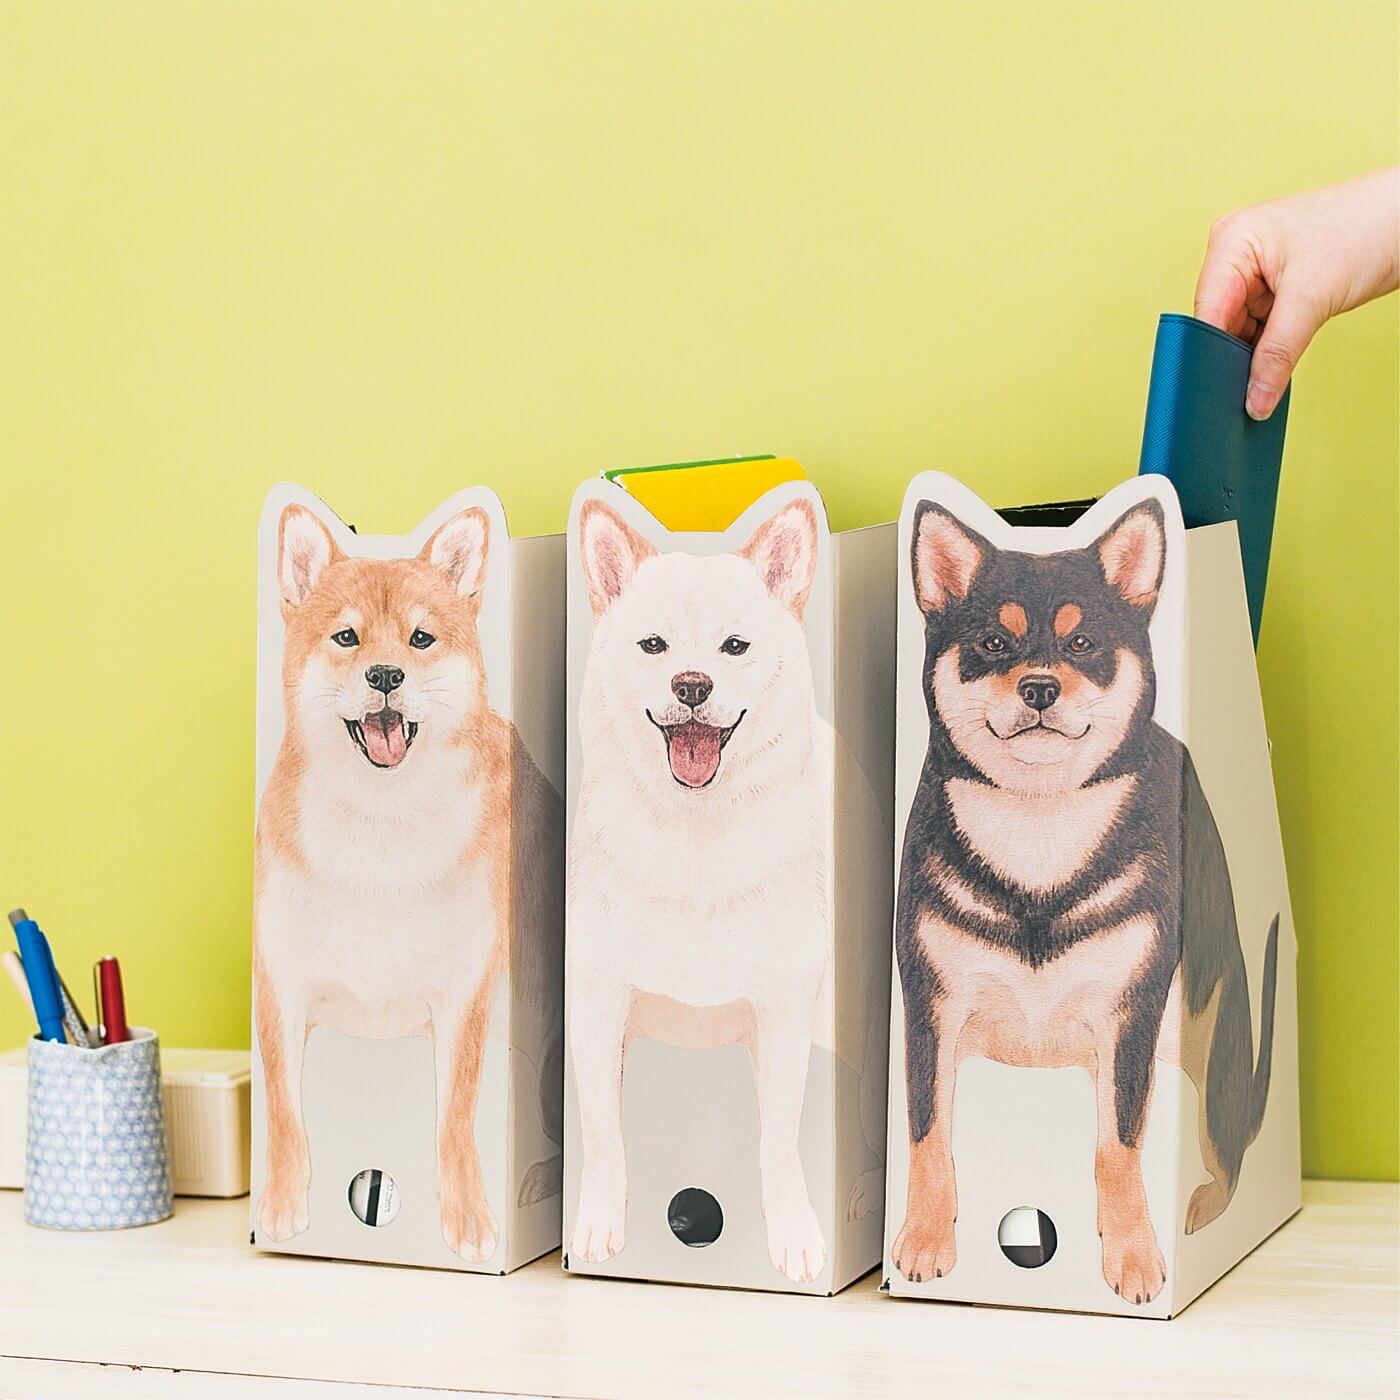 You Can Now Buy This Shiba Inu 9-Piece Marshmallow Set Online, And Lots of Other Kawaii Things! - WORLD OF BUZZ 2